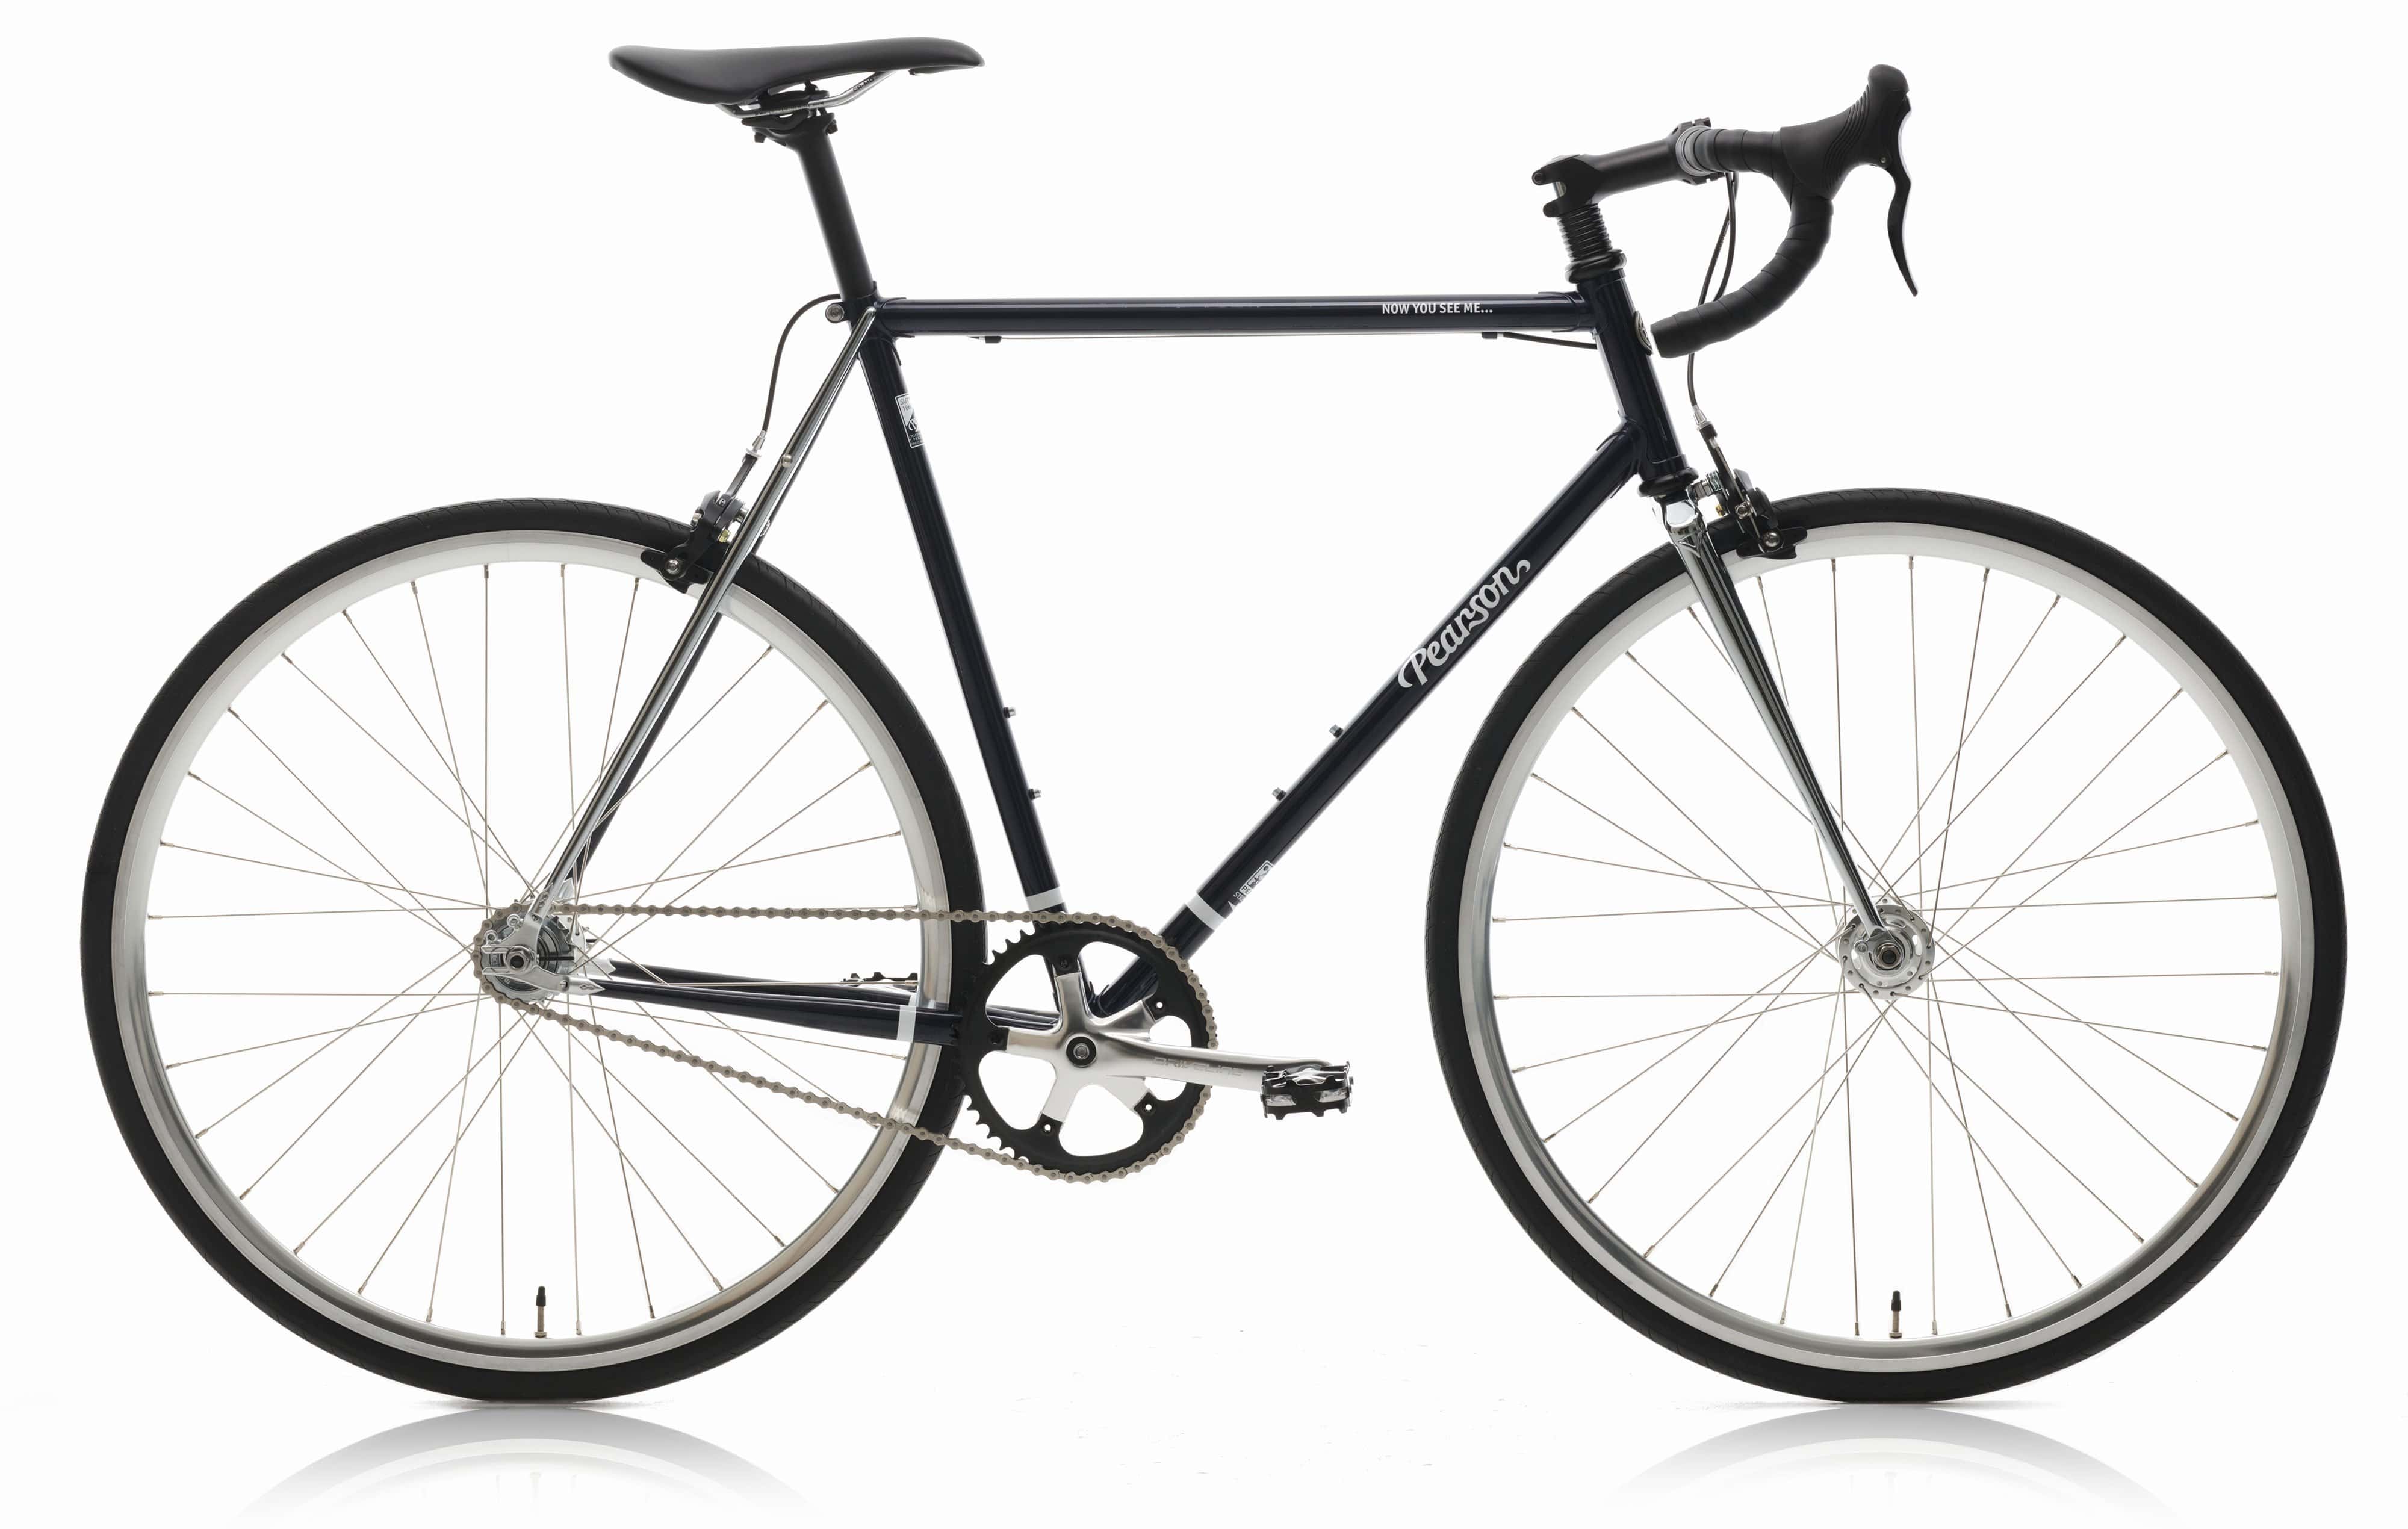 Pcs  Now You See Me - Steel Single Speed Bike  Continental Gator Hardshell 28mm / With Mudguards / Large